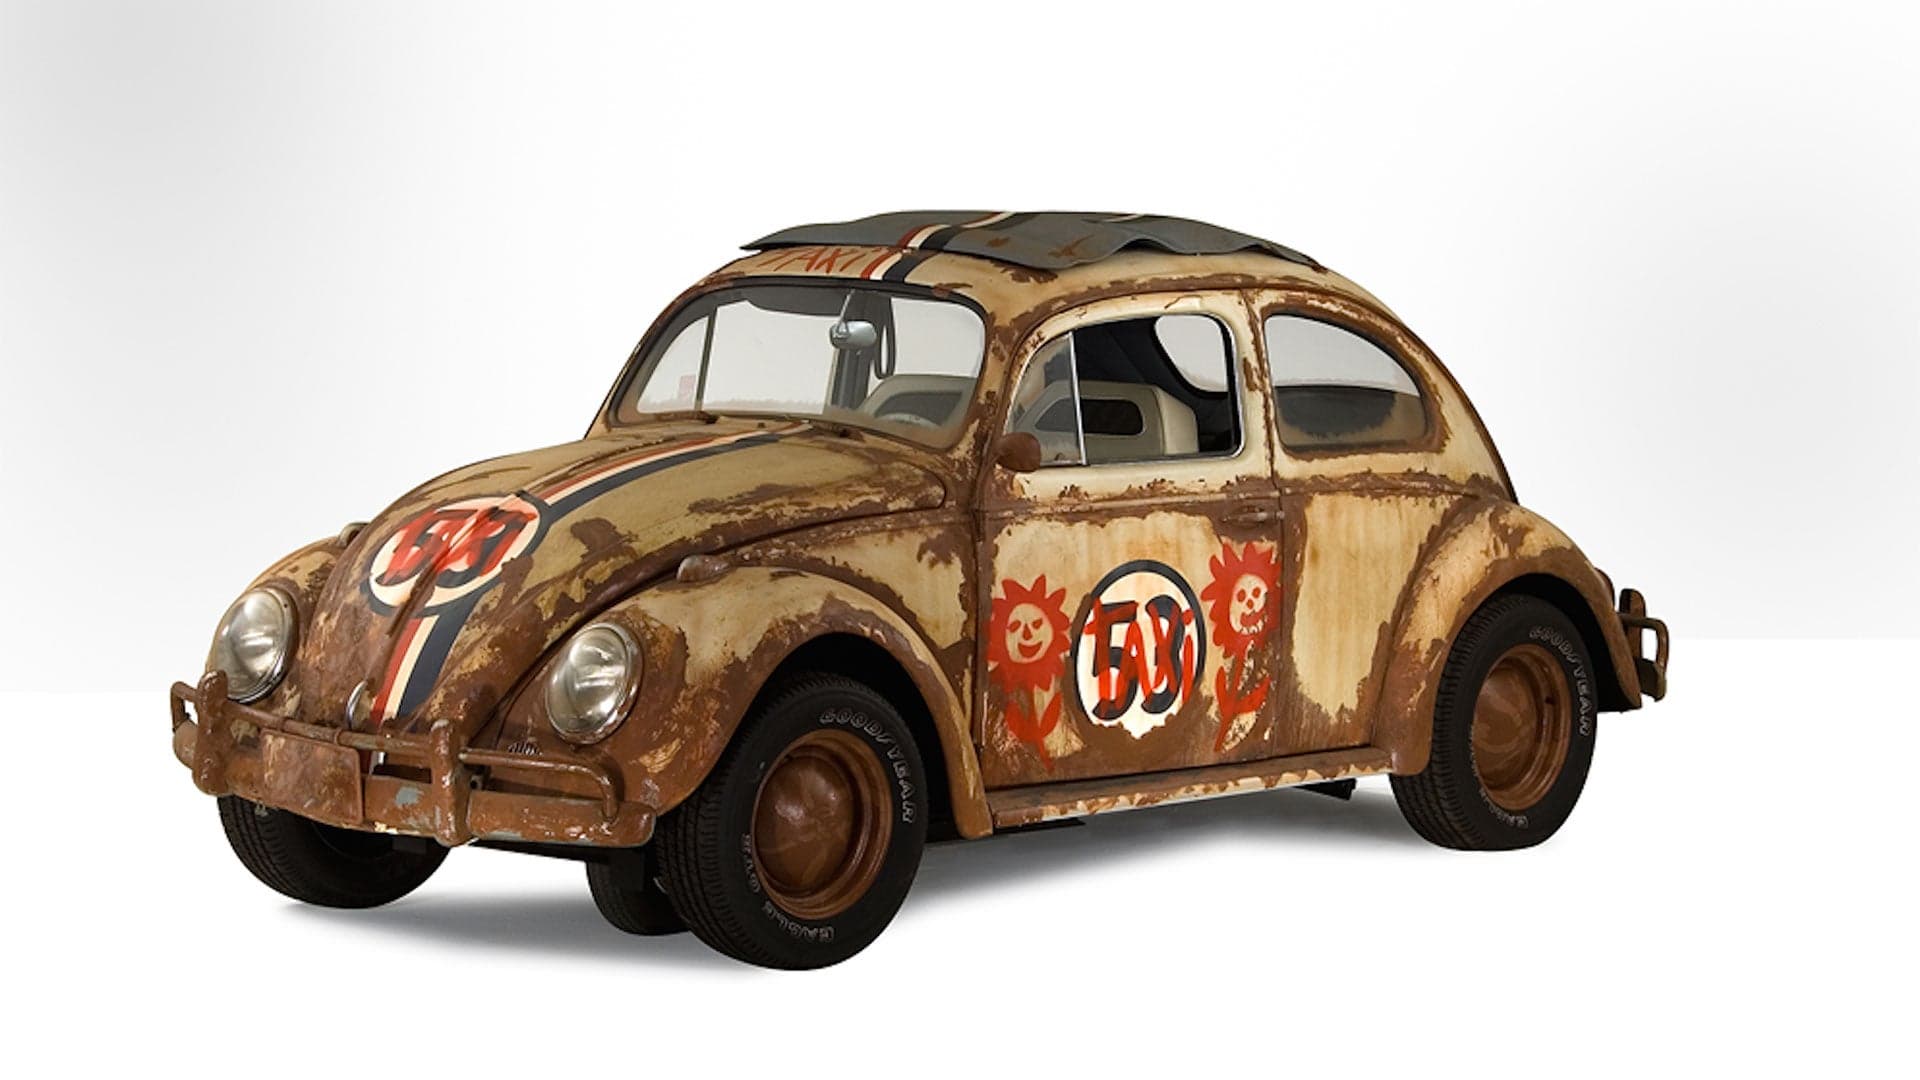 You Can Ghostride Herbie the Love Bug